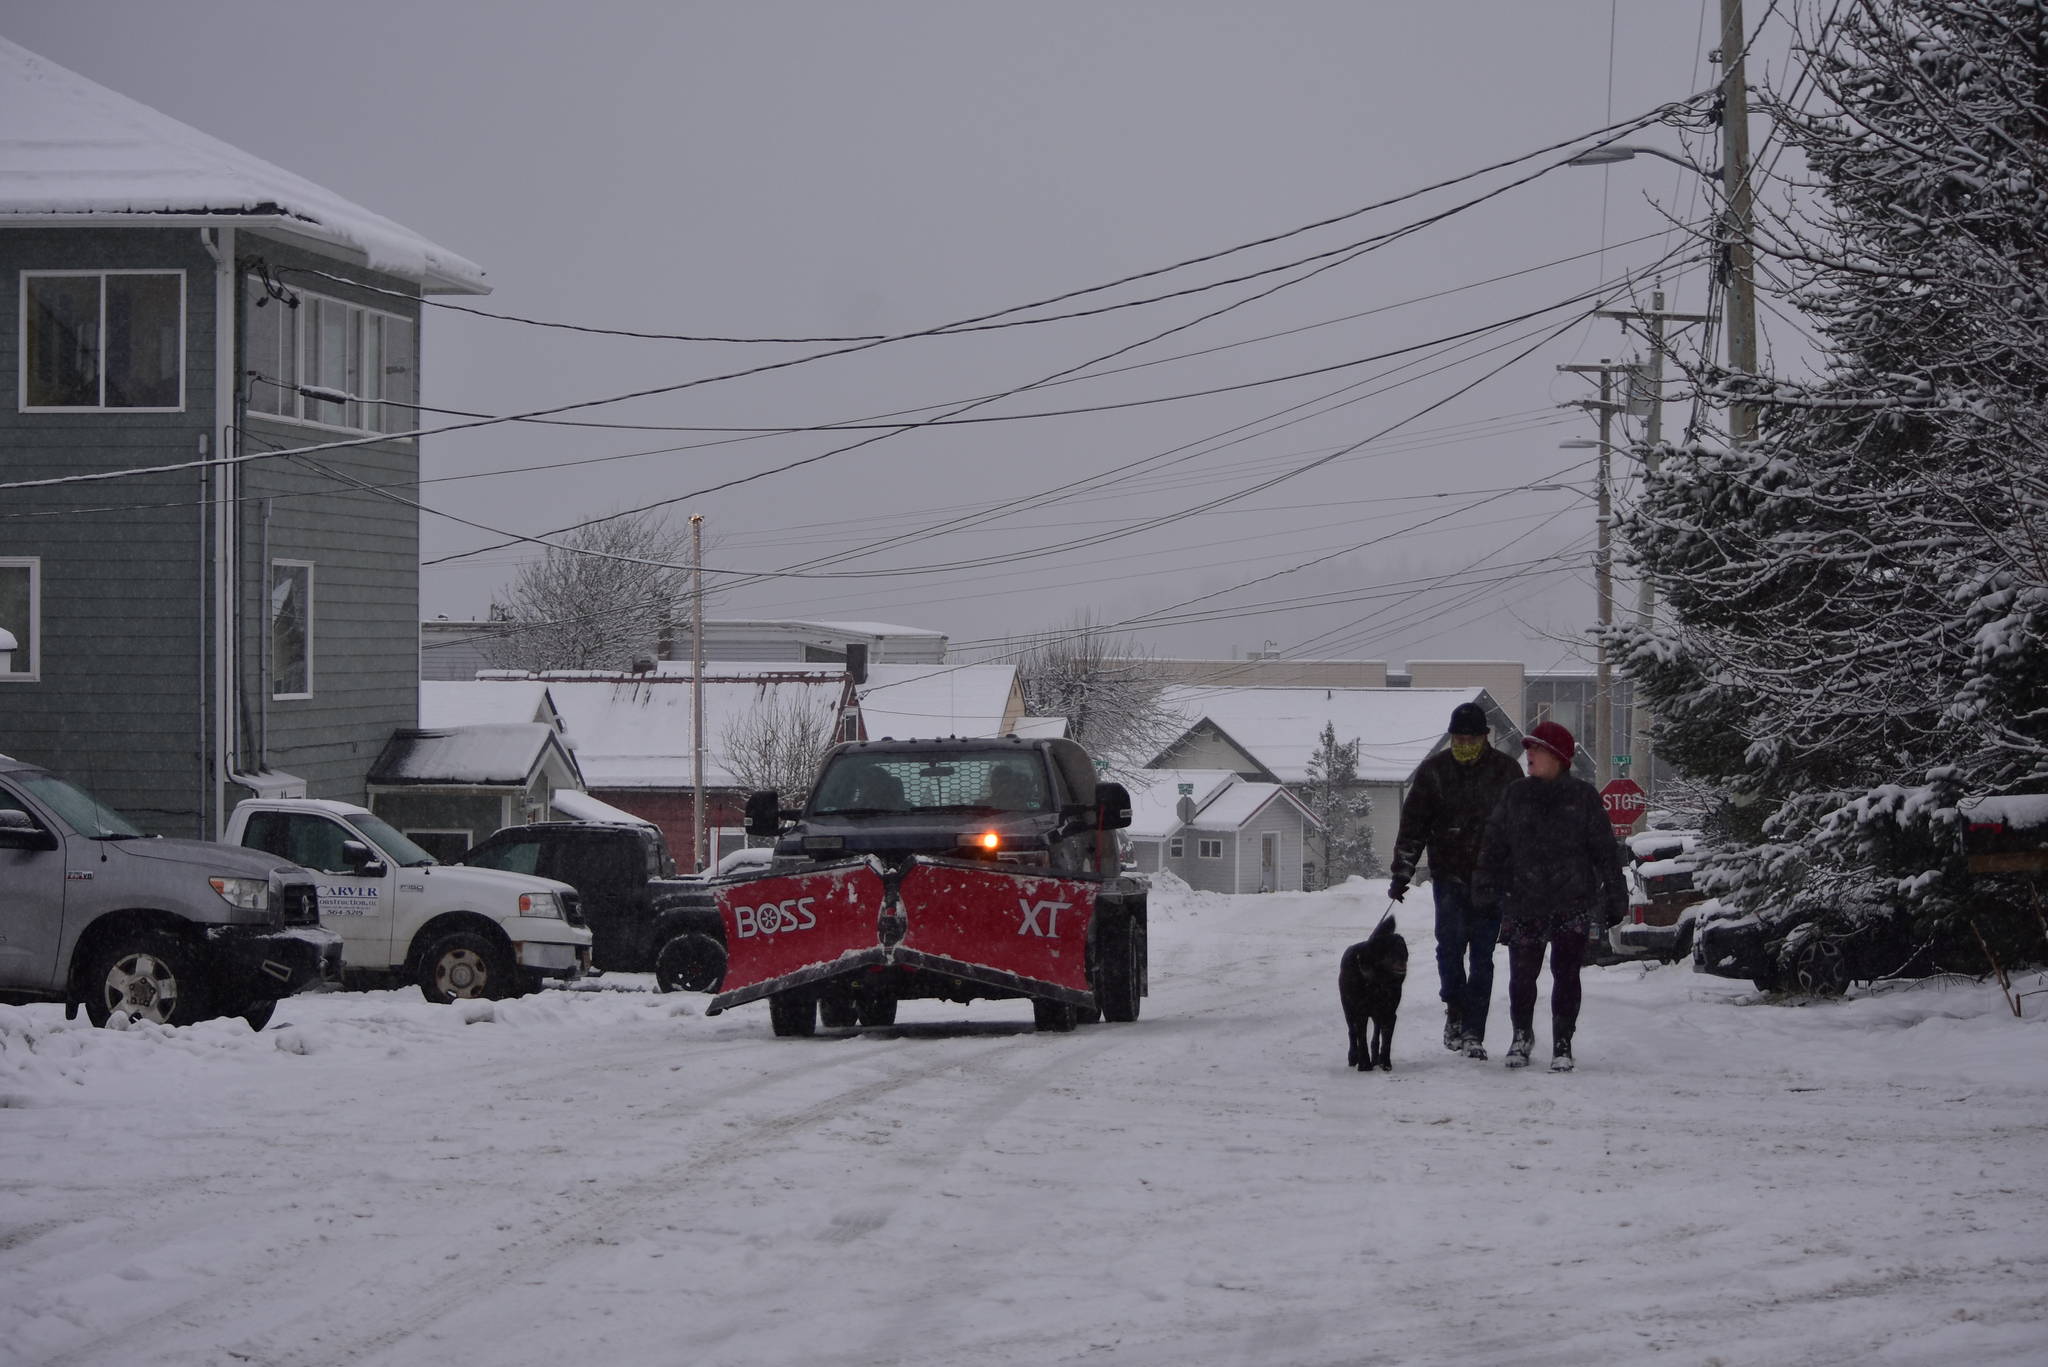 Juneauites were out and about in the snow on 2nd Street in Douglas Wednesday, but the National Weather Service issued a winter storm watch for another storm Thursday morning which could bring up to two feet of snow in two days. (Peter Segall / Juneau Empire)